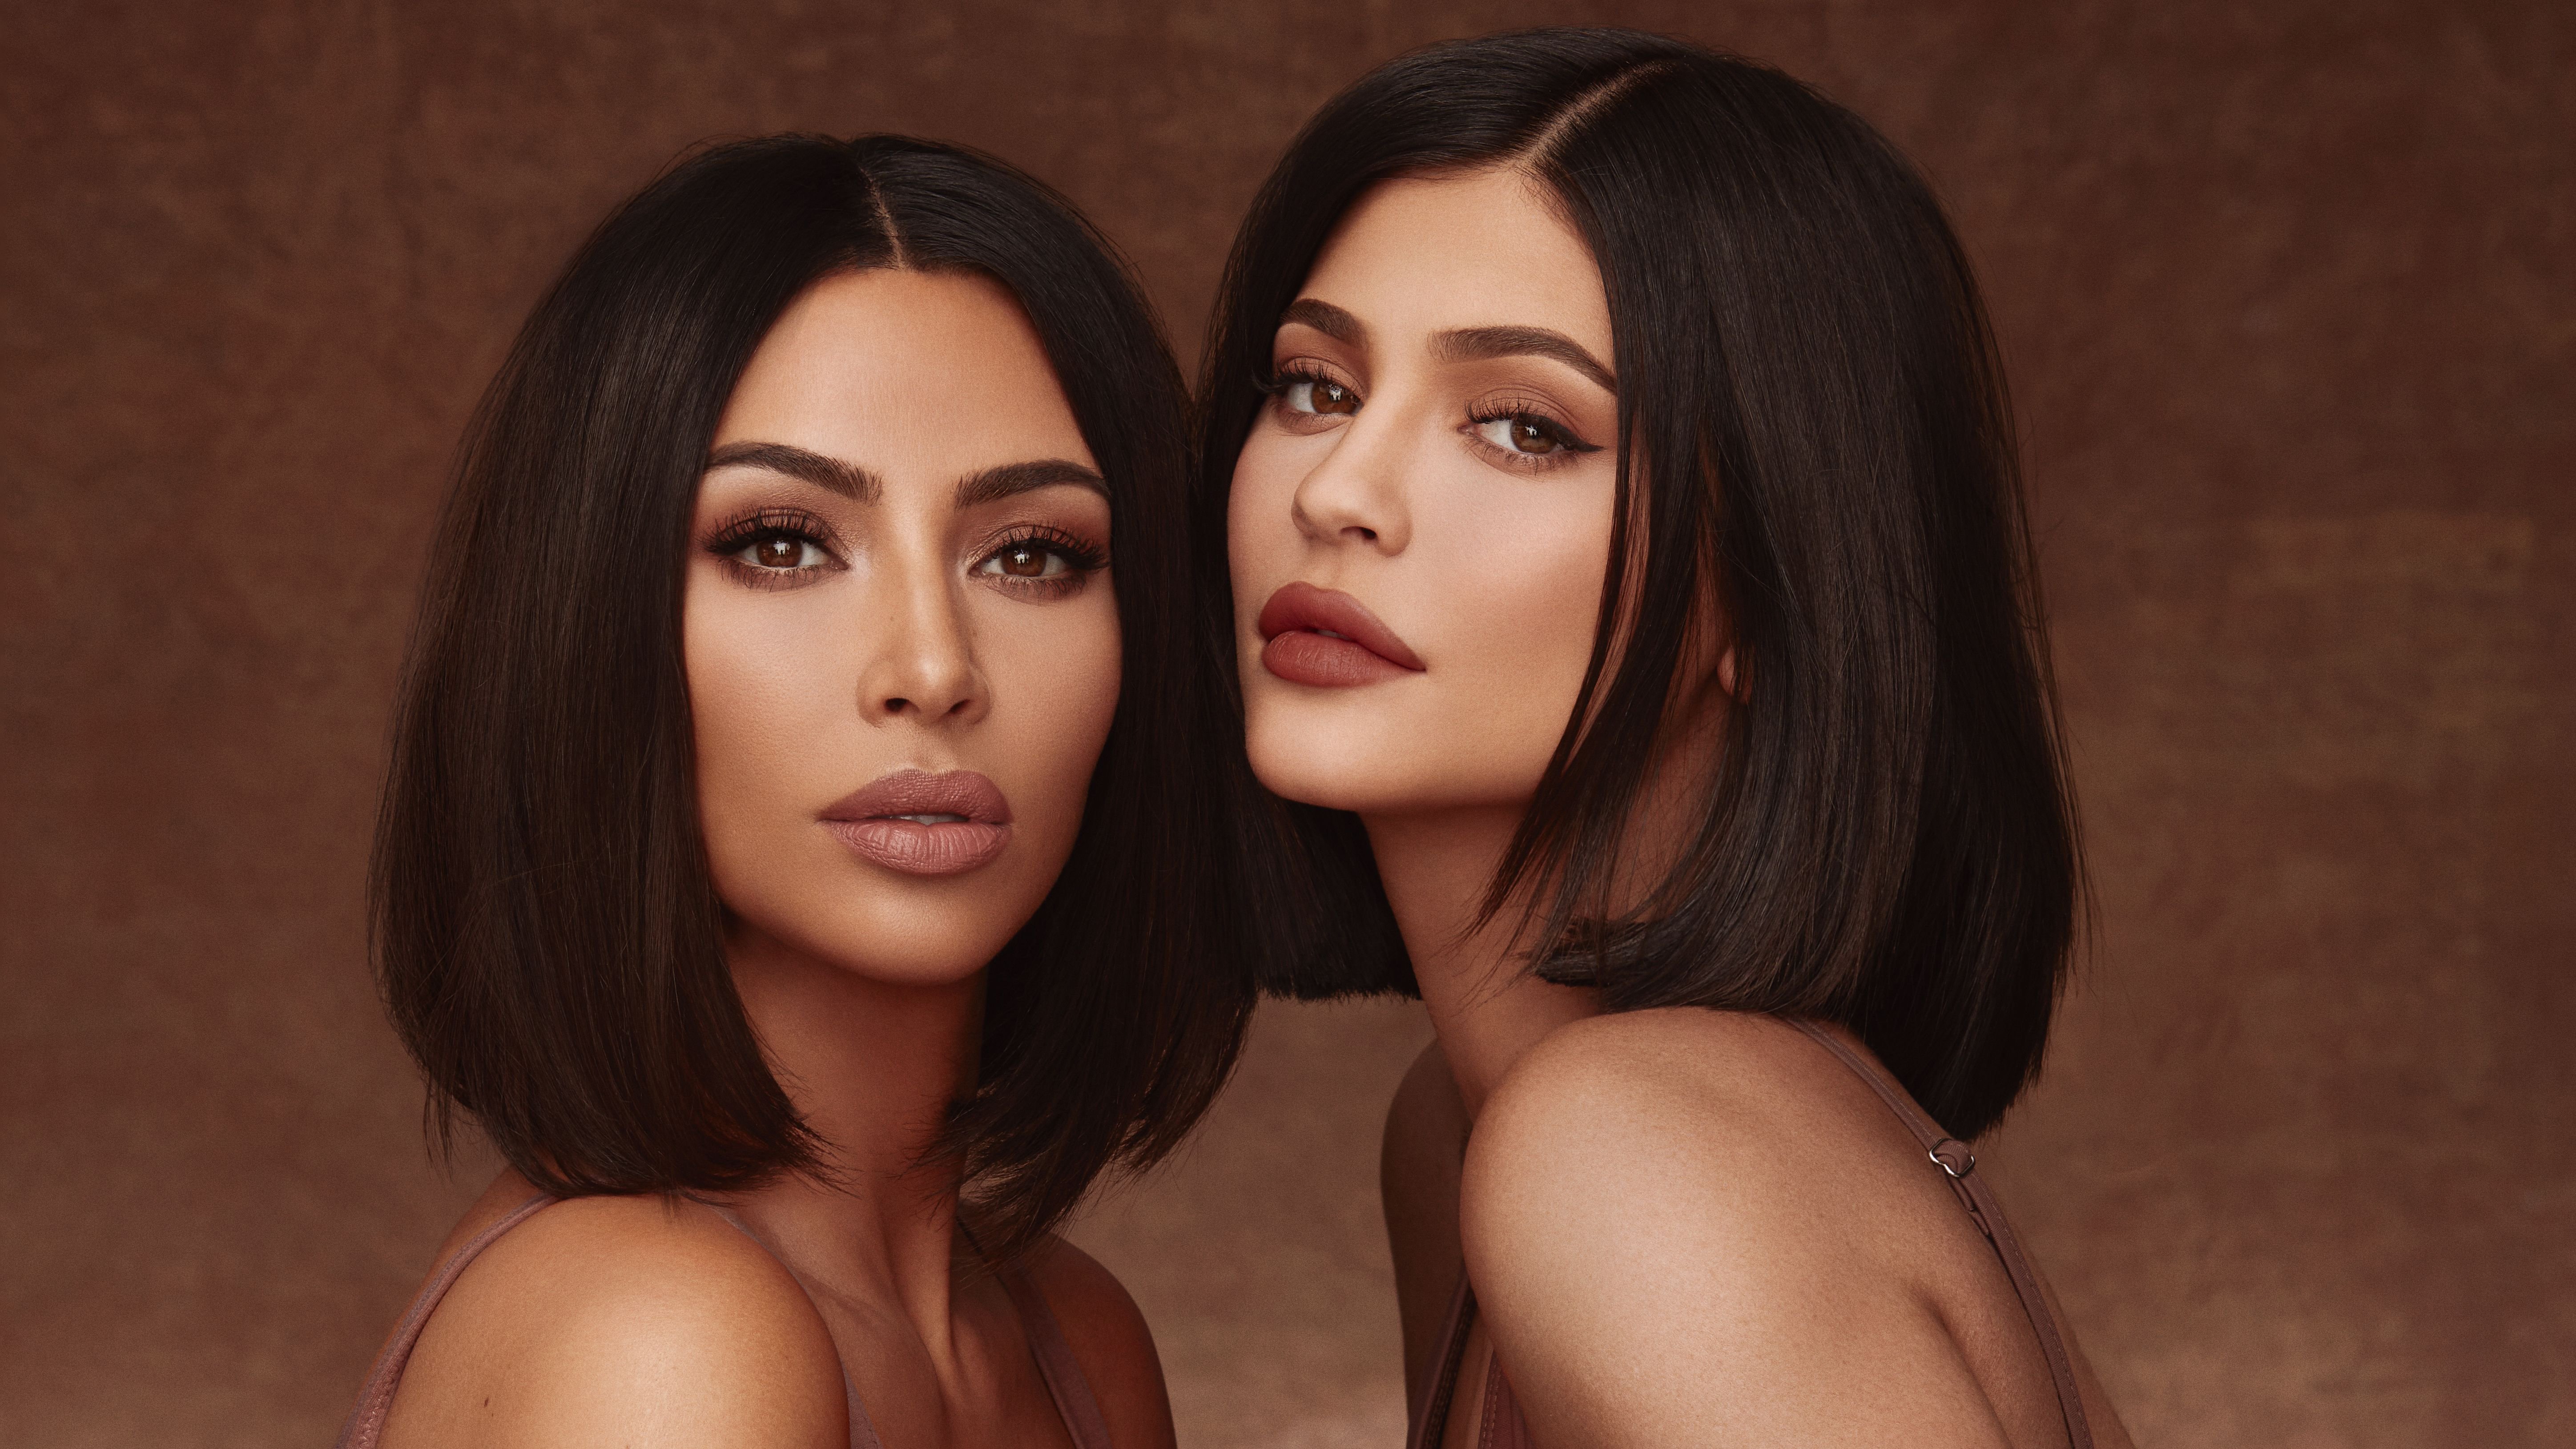 Kim Kardashian And Kylie Jenner 2019 4k, HD Celebrities, 4k Wallpapers, Image, Backgrounds, Photos and Pictures